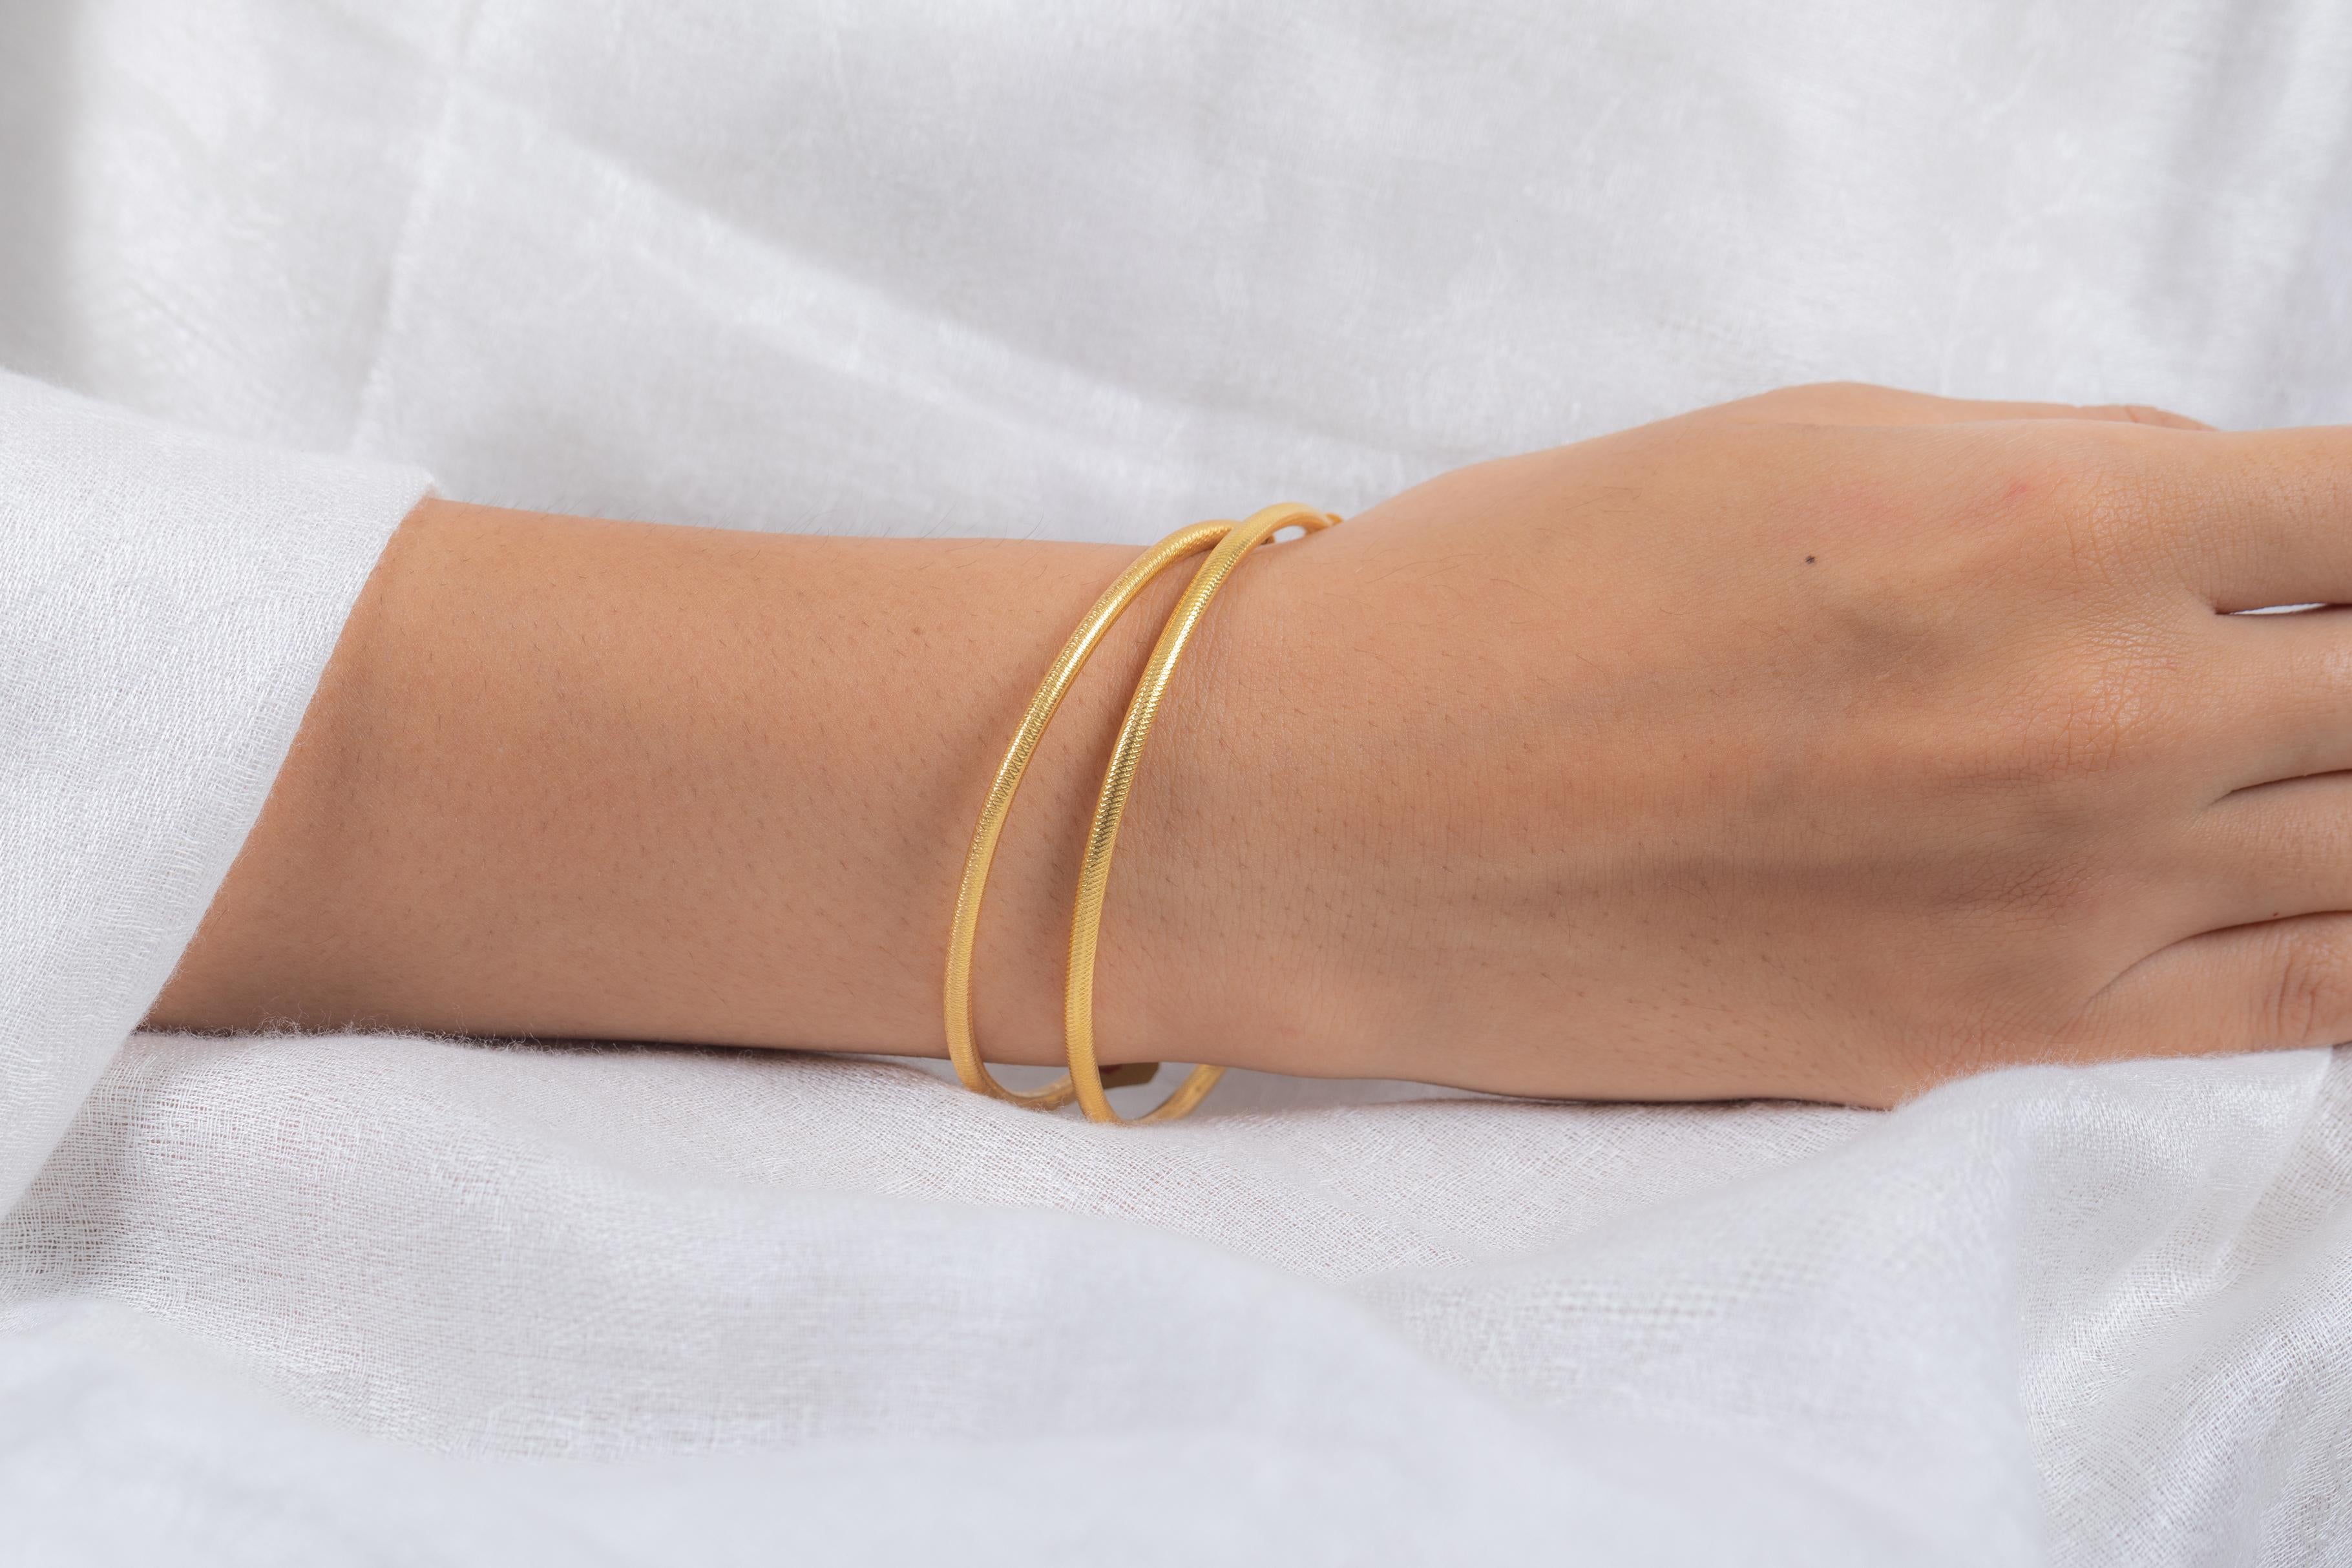 Modern Bangle in 18K Gold. It’s a great jewelry ornament to wear on occasions and at the same time works as a wonderful gift for your loved ones. These lovely statement pieces are perfect generation jewelry to pass on.
Bangles feel comfortable while